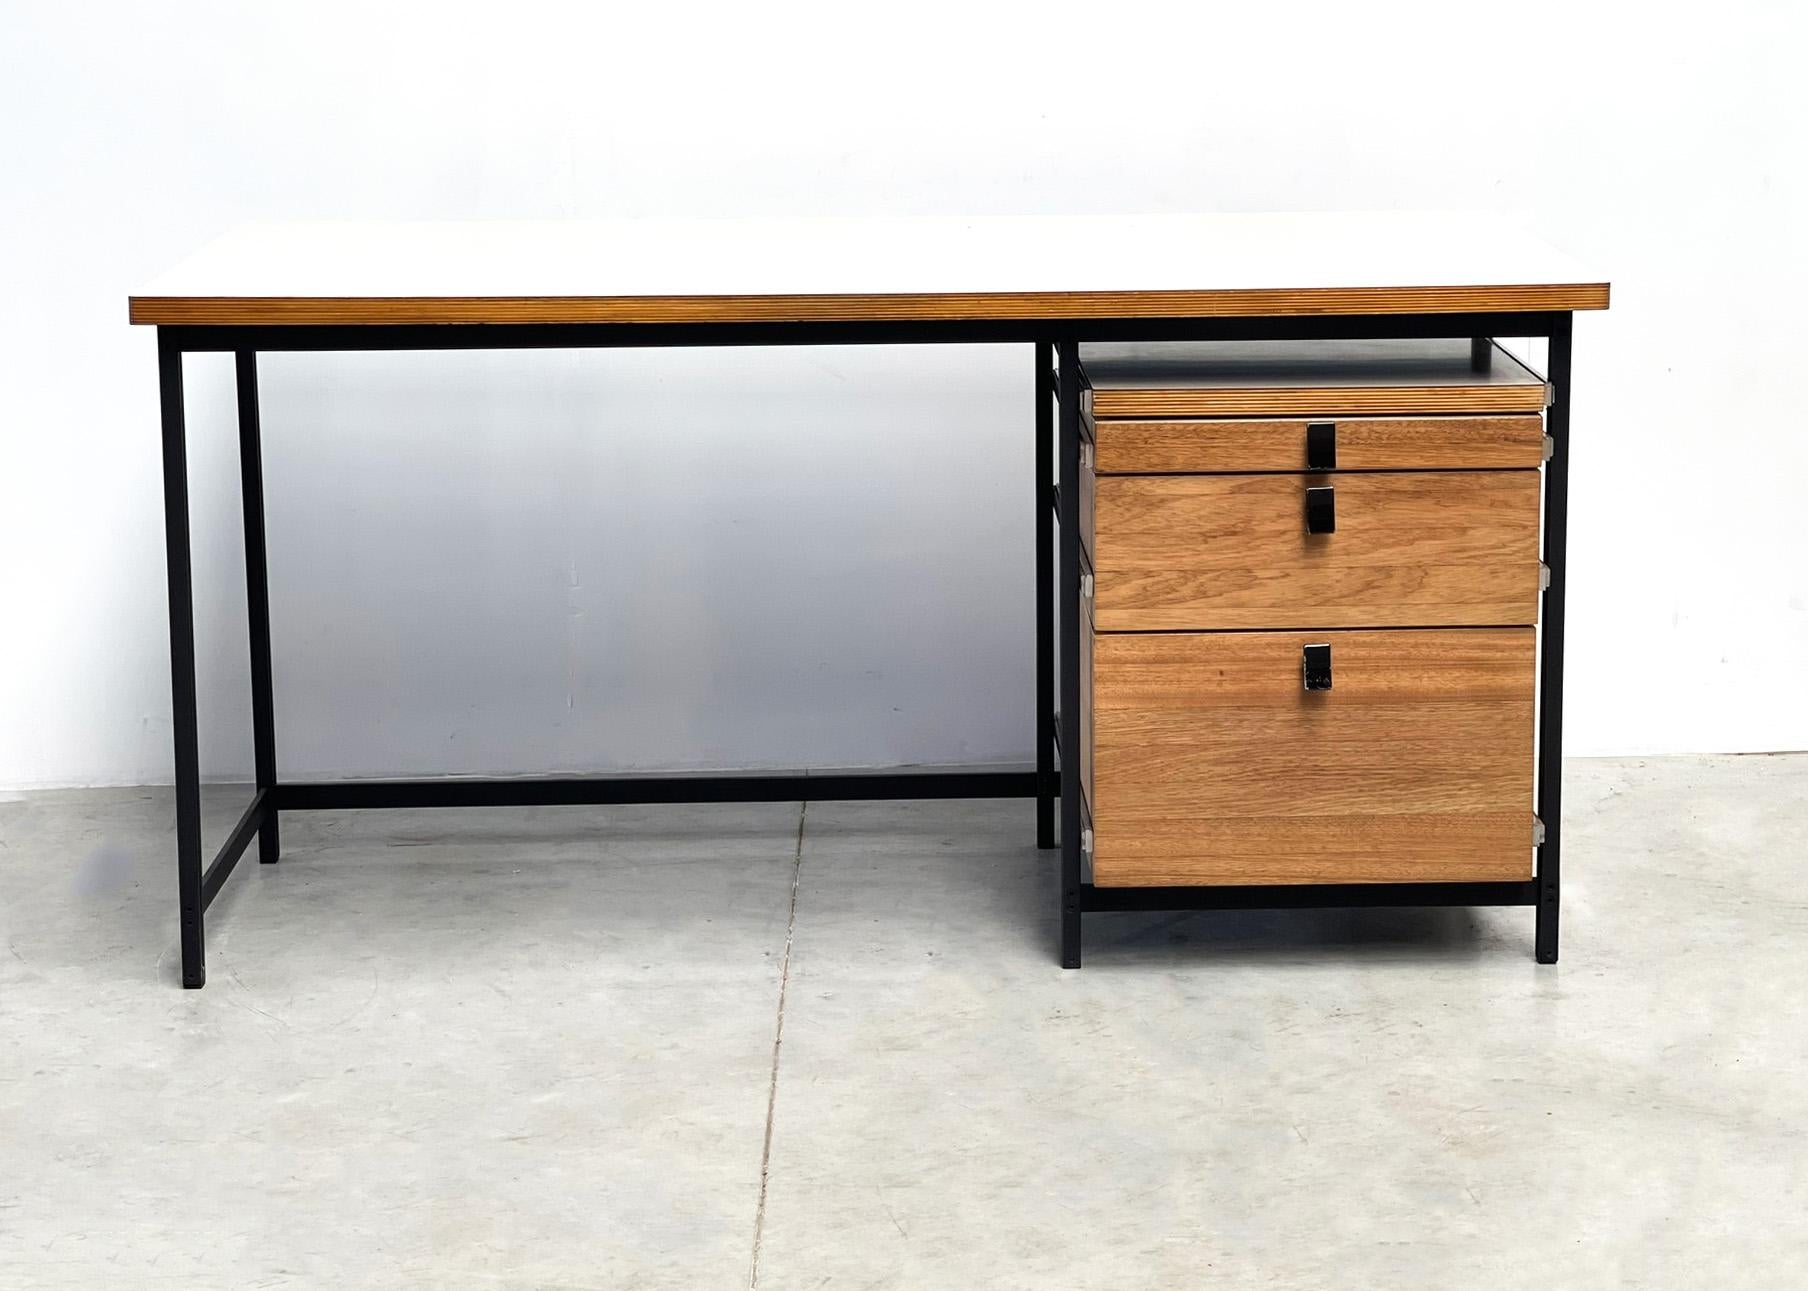 Desk by Jules Wabbes for Mobilier Universel
A desk by 1 of Belgium's best-known and most important deisgners, Jules Wabbes. He designed this desk in the late 60s for Mobilier Universel.

 

Jules Wabbes designed several pieces of furniture for this